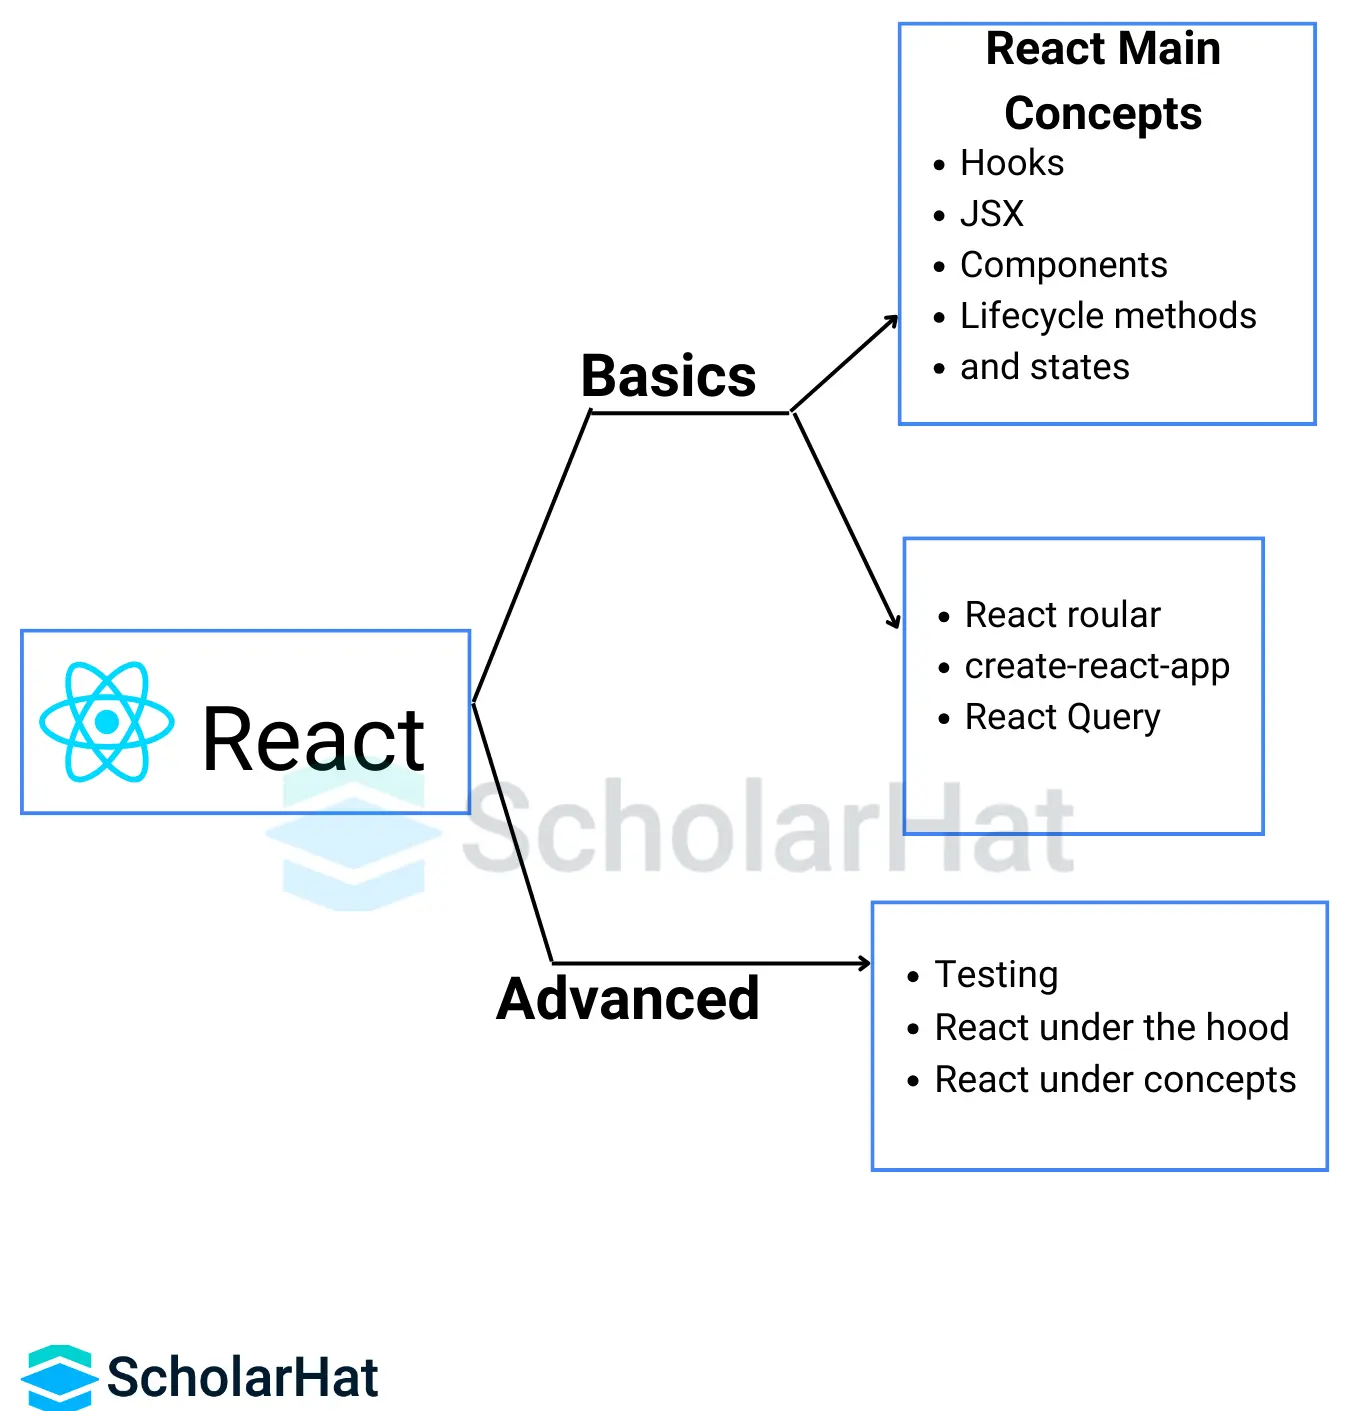 What is React JS?